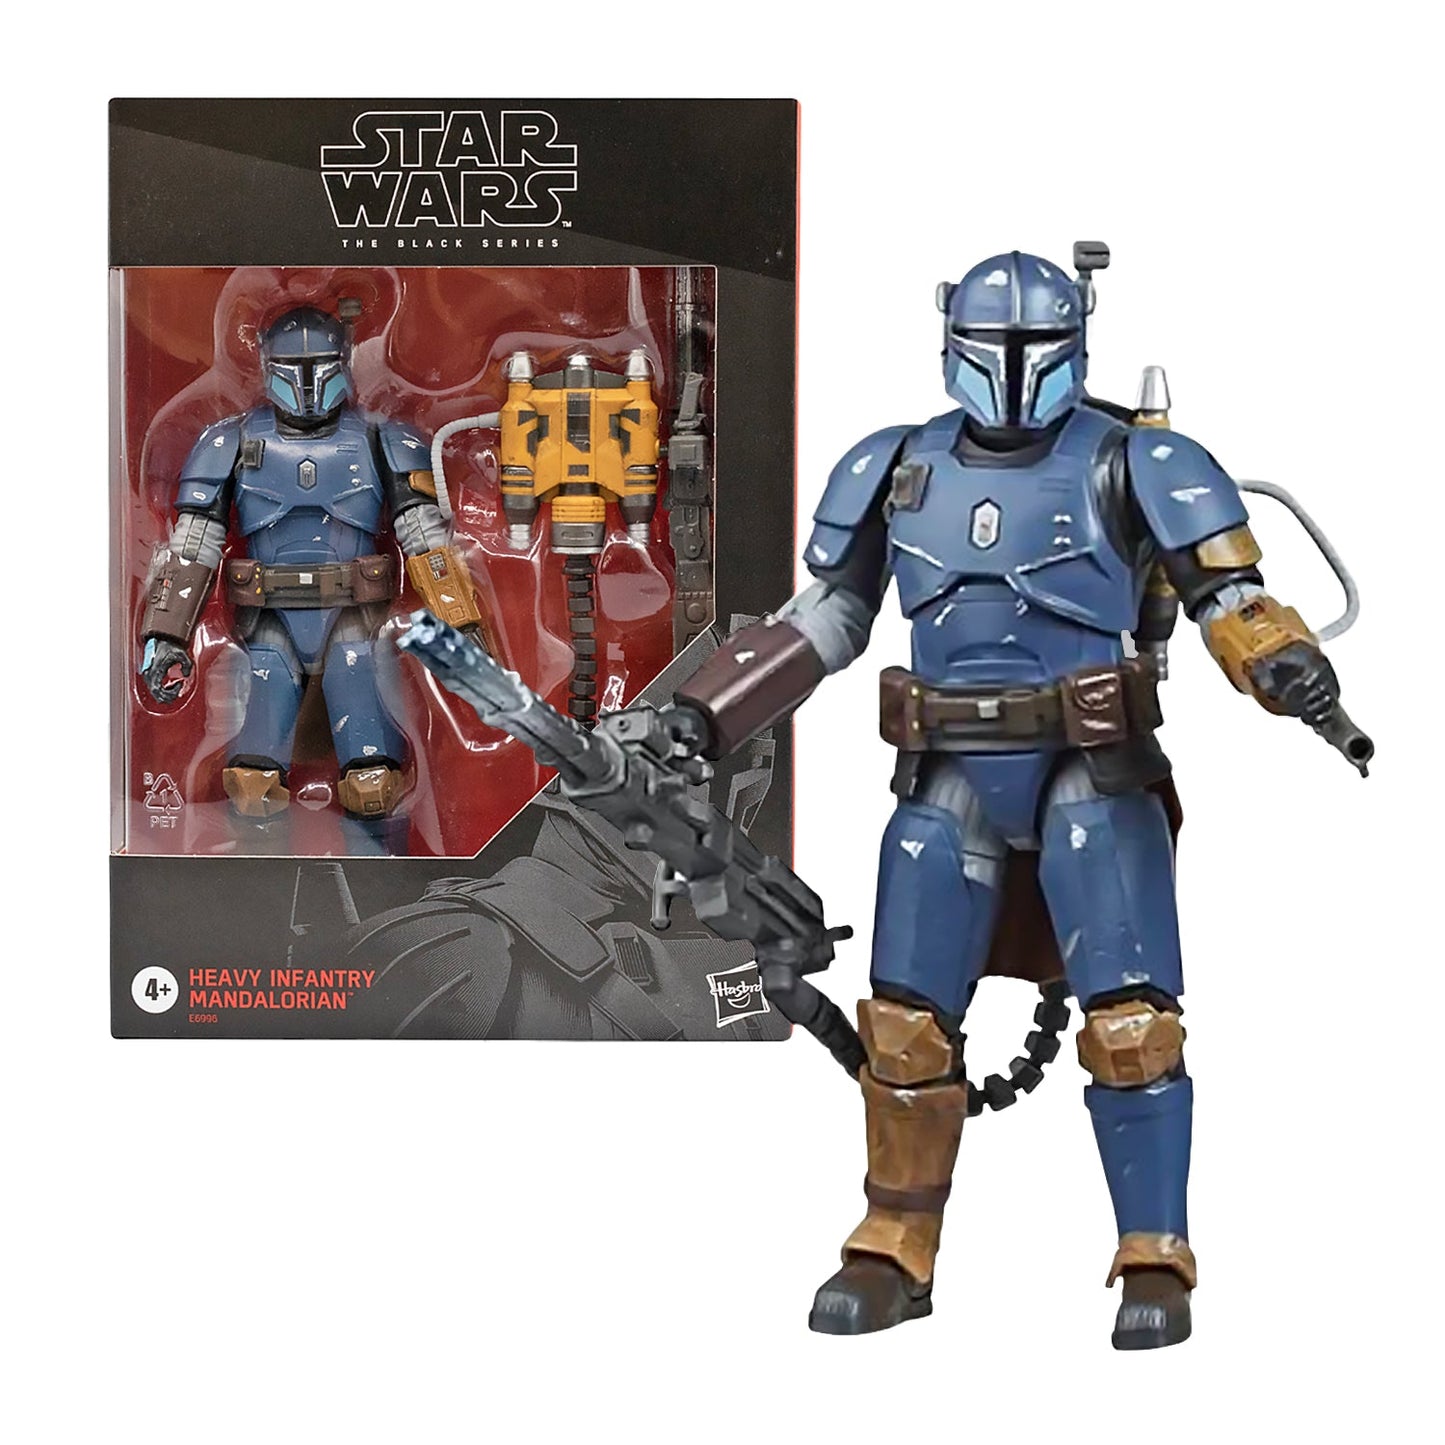 Star Wars The Black Series The Mandalorian Heavy Infantry Action Figure